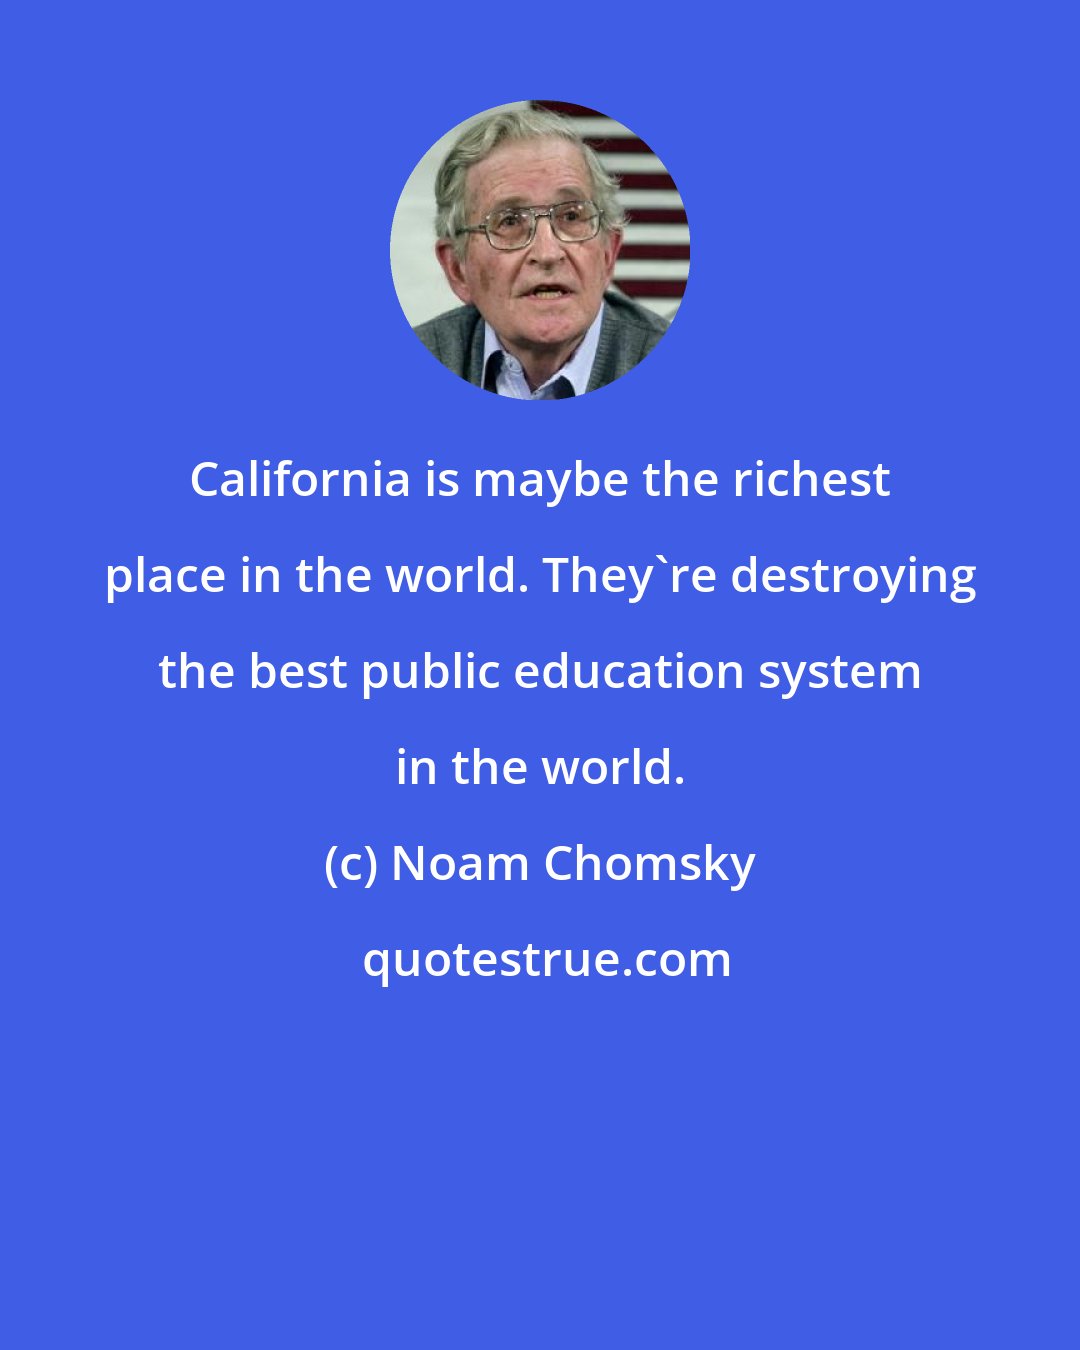 Noam Chomsky: California is maybe the richest place in the world. They're destroying the best public education system in the world.